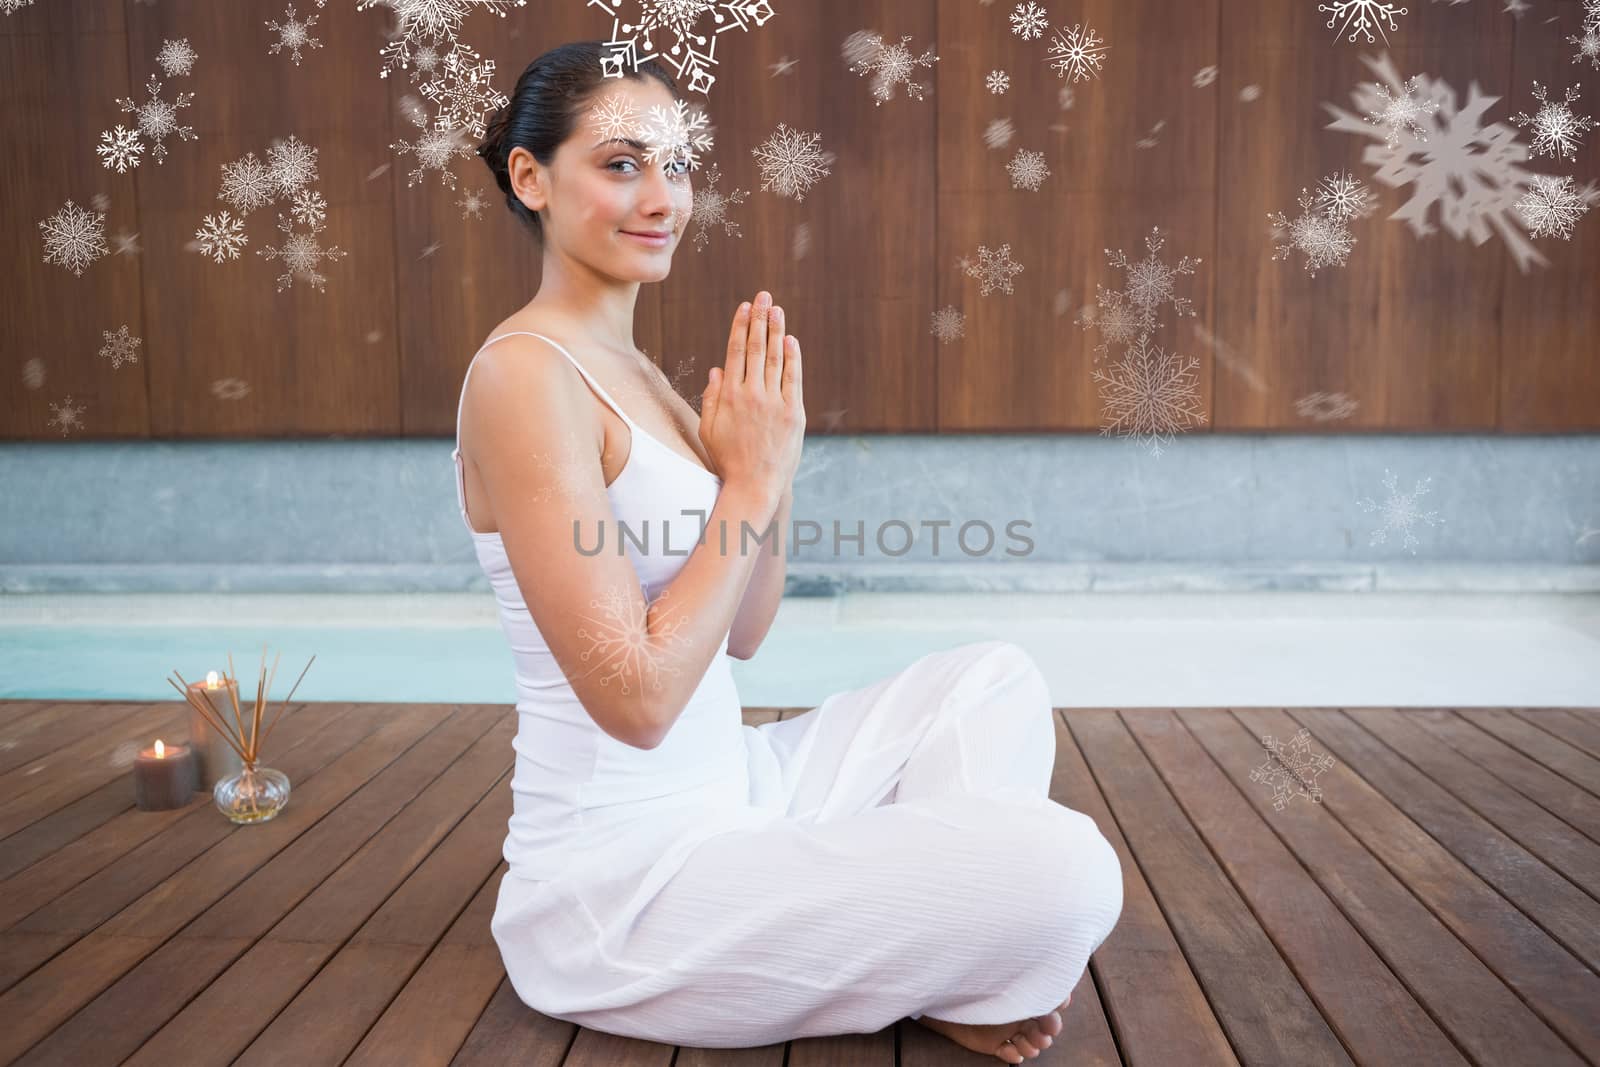 Content brunette in white sitting in lotus pose smiling at camera against snowflakes